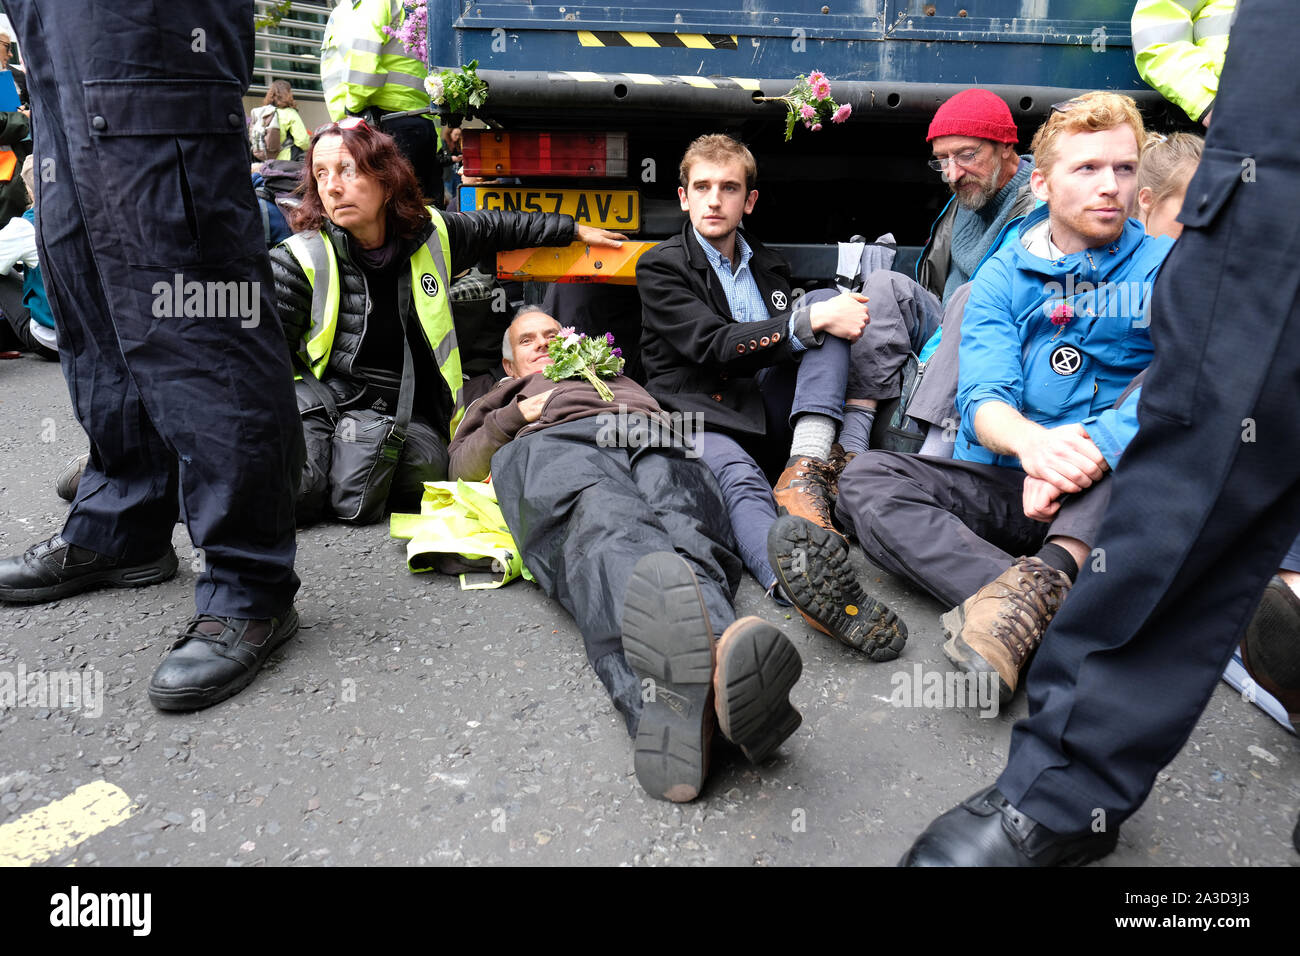 Westminster, London, UK - Monday 7th October 2019 - Extinction Rebellion XR climate protesters block Marsham Street directly outside the Home Office - some protesters have locked themselves to the underside of a lorry directly outside the Home Office building. Police stand in front of them. Photo Steven May / Alamy Live News Stock Photo